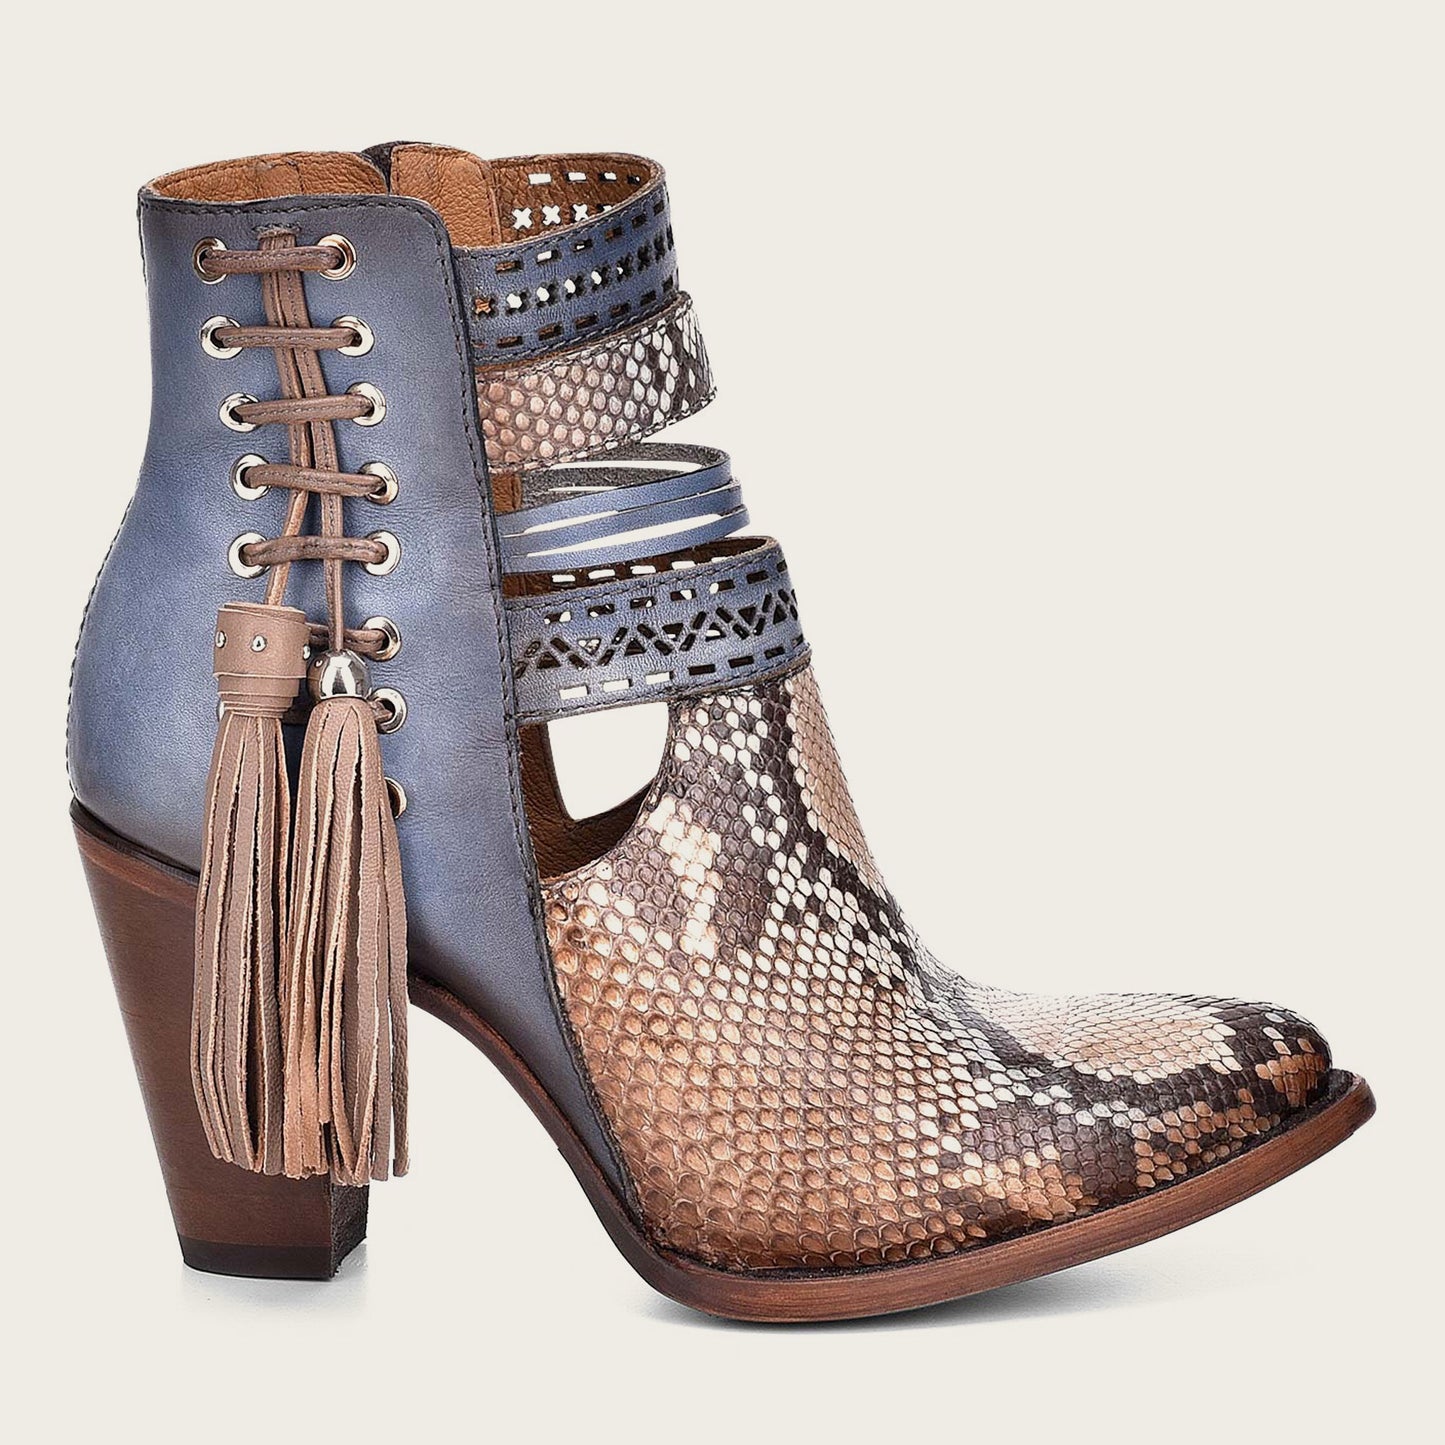 Blue python leather bootie with sleek design and pointed toe.